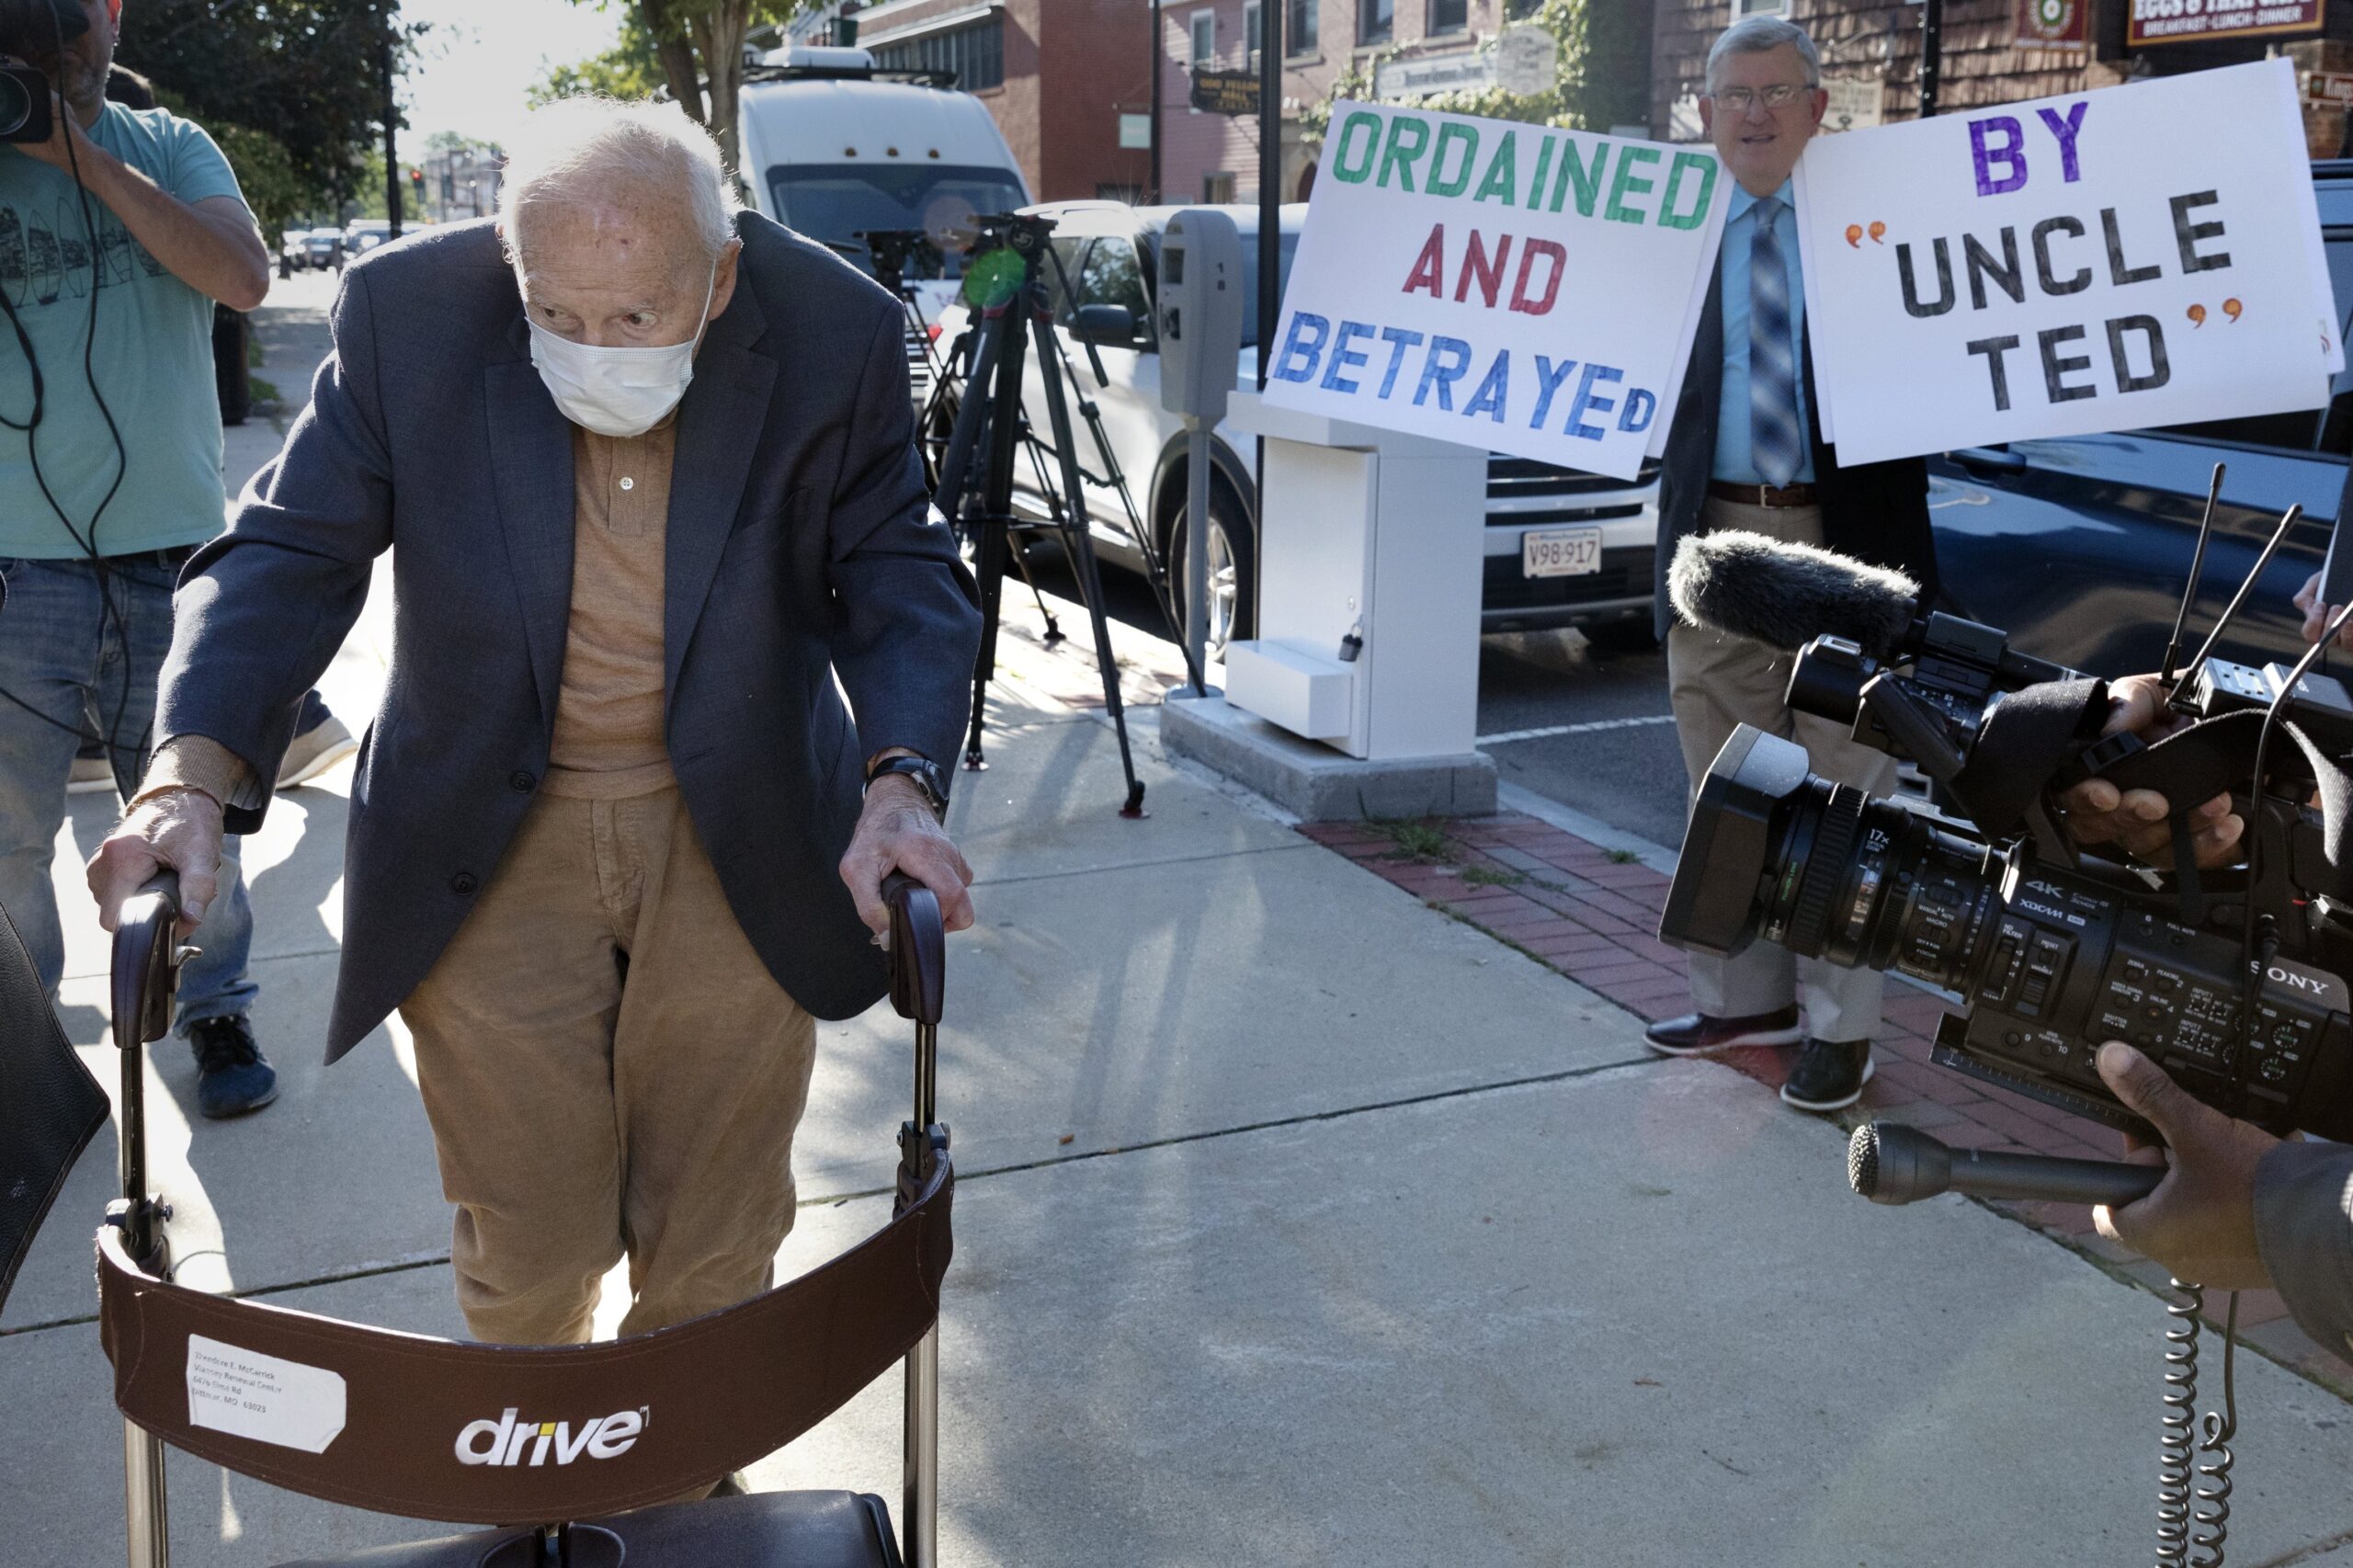 Former Cardinal Theodore McCarrick, left, arrives at Dedham District Court, Friday, Sept. 3, 2021, in Dedham, Mass. McCarrick, the once-powerful American prelate who was expelled from the priesthood for sexual abuse, pleaded not guilty Friday to sexually assaulting a 16-year-old boy during a wedding reception in Massachusetts nearly 50 years ago. (AP Photo/Michael Dwyer)